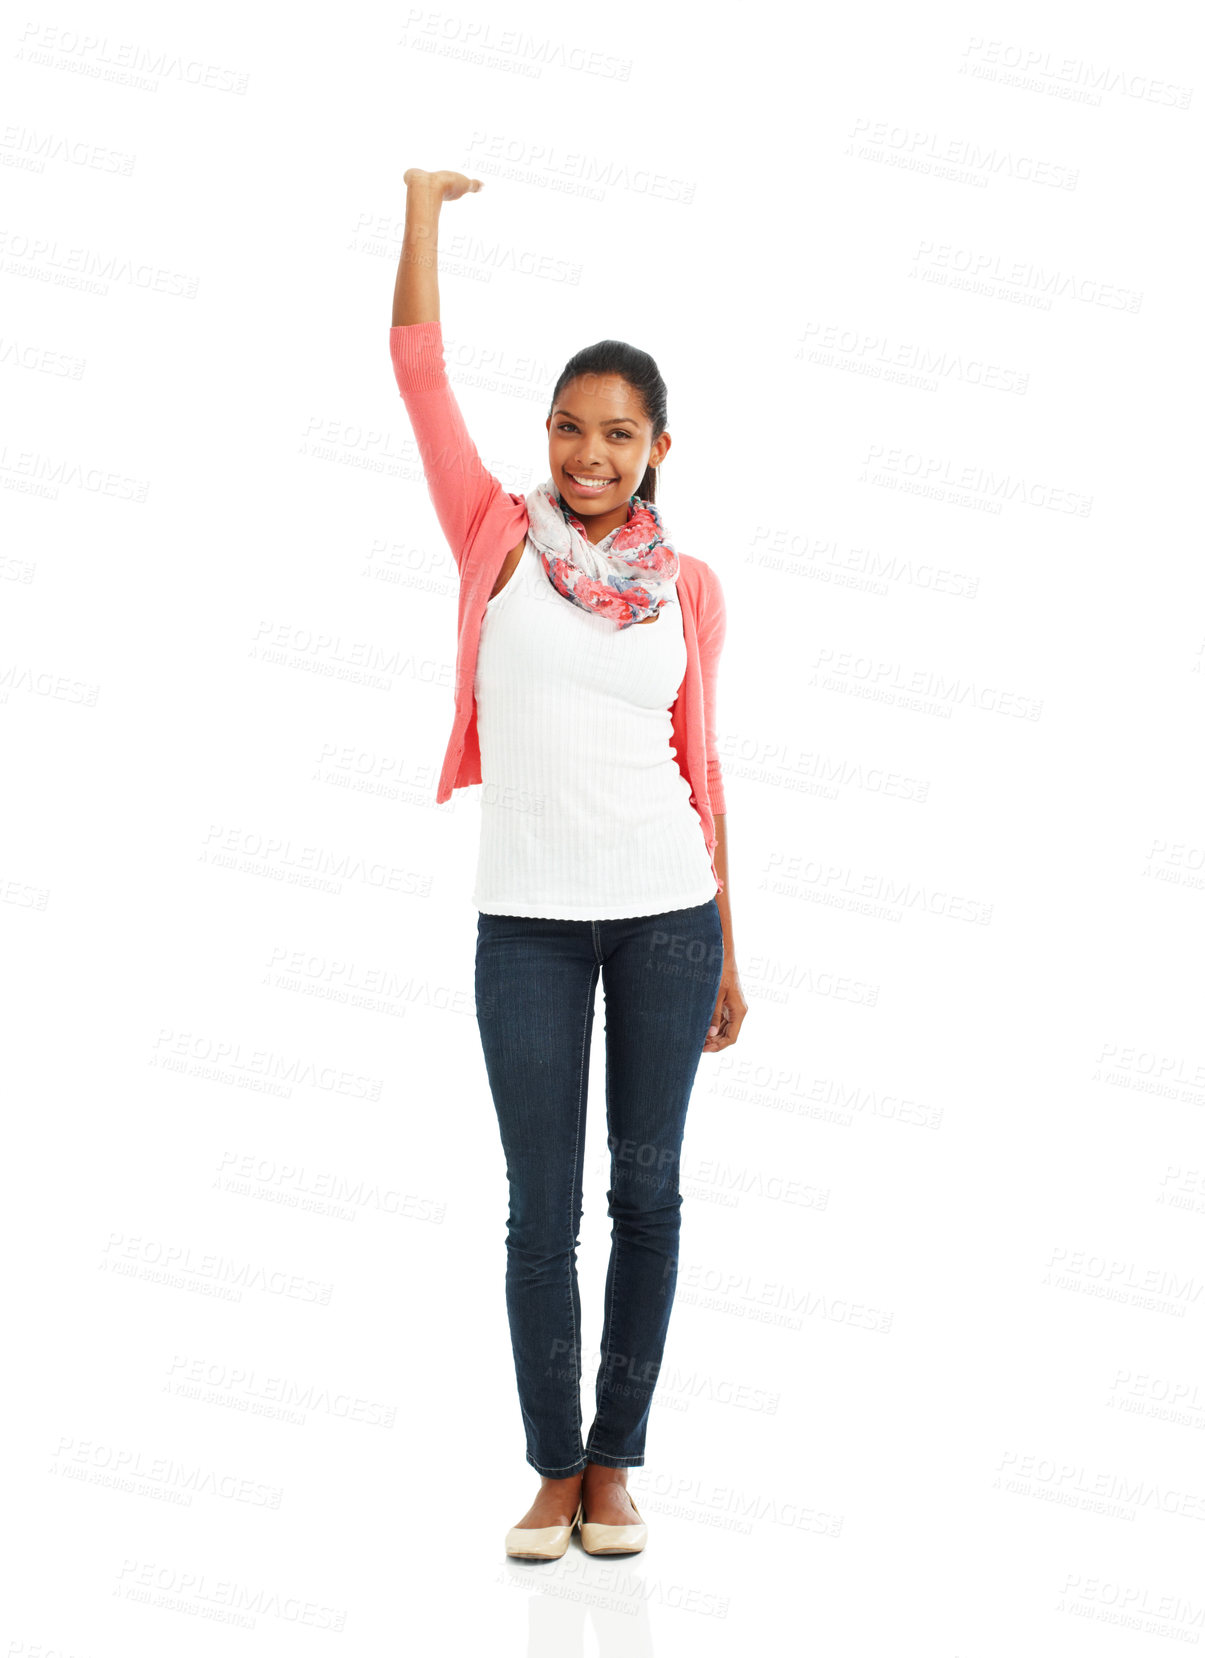 Buy stock photo A full body portrait of a pretty young woman posing with one arm raised against a white background